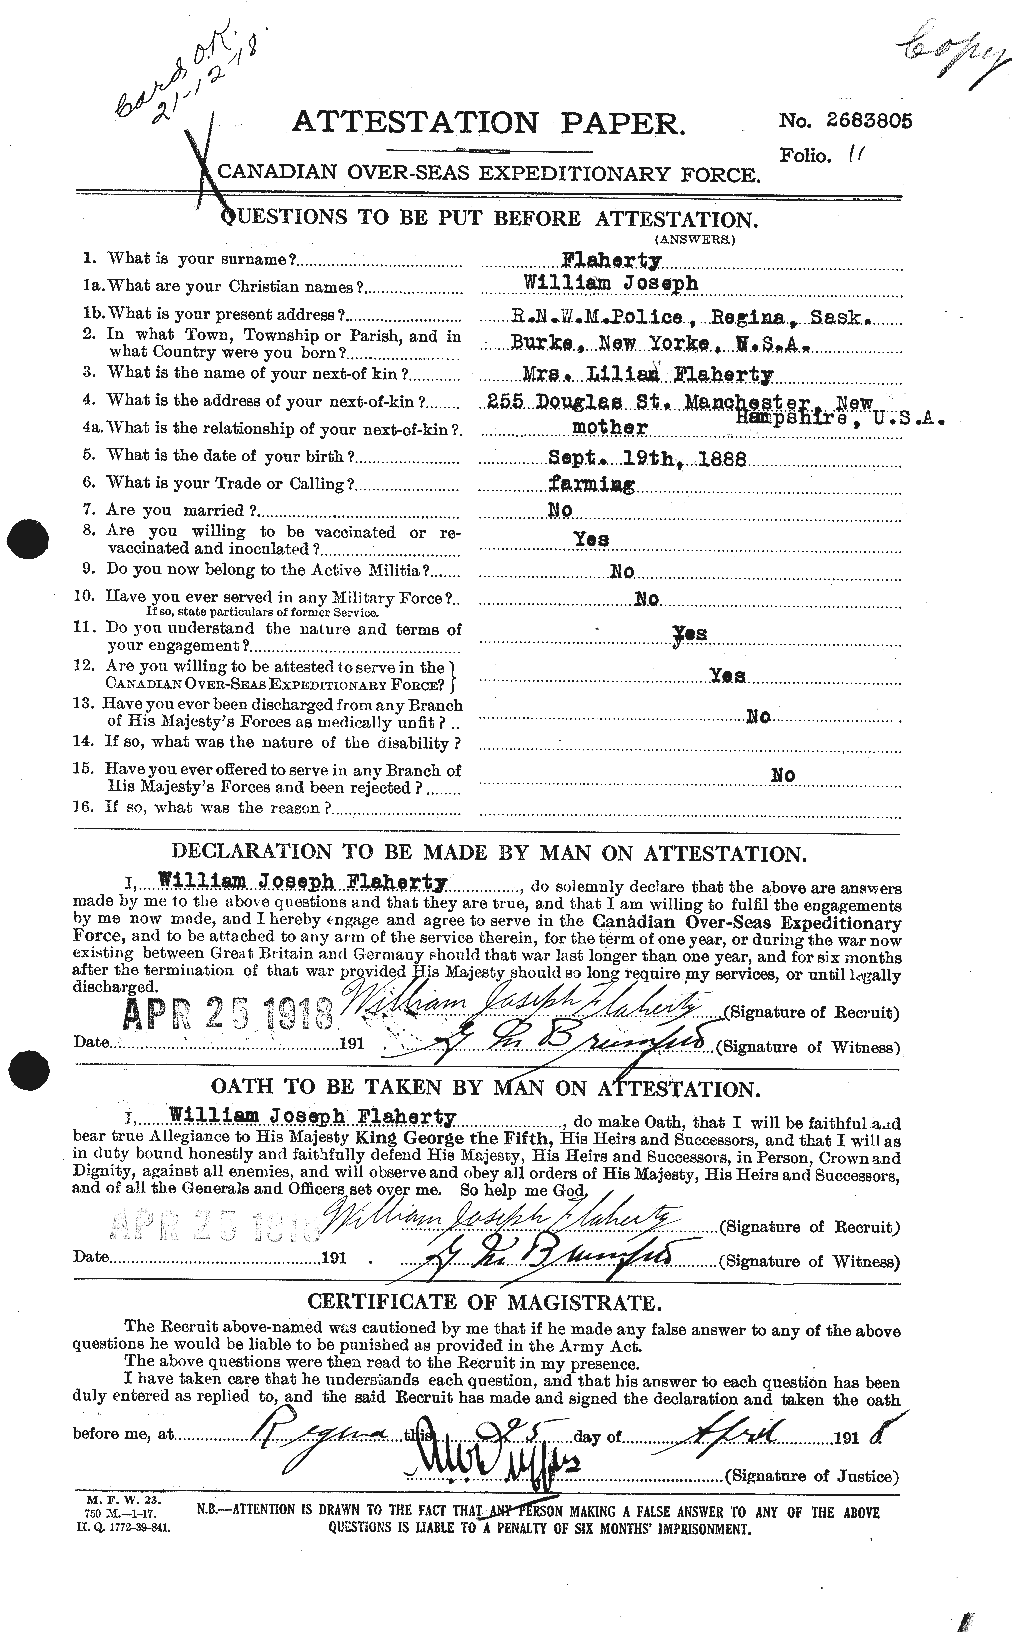 Personnel Records of the First World War - CEF 323387a